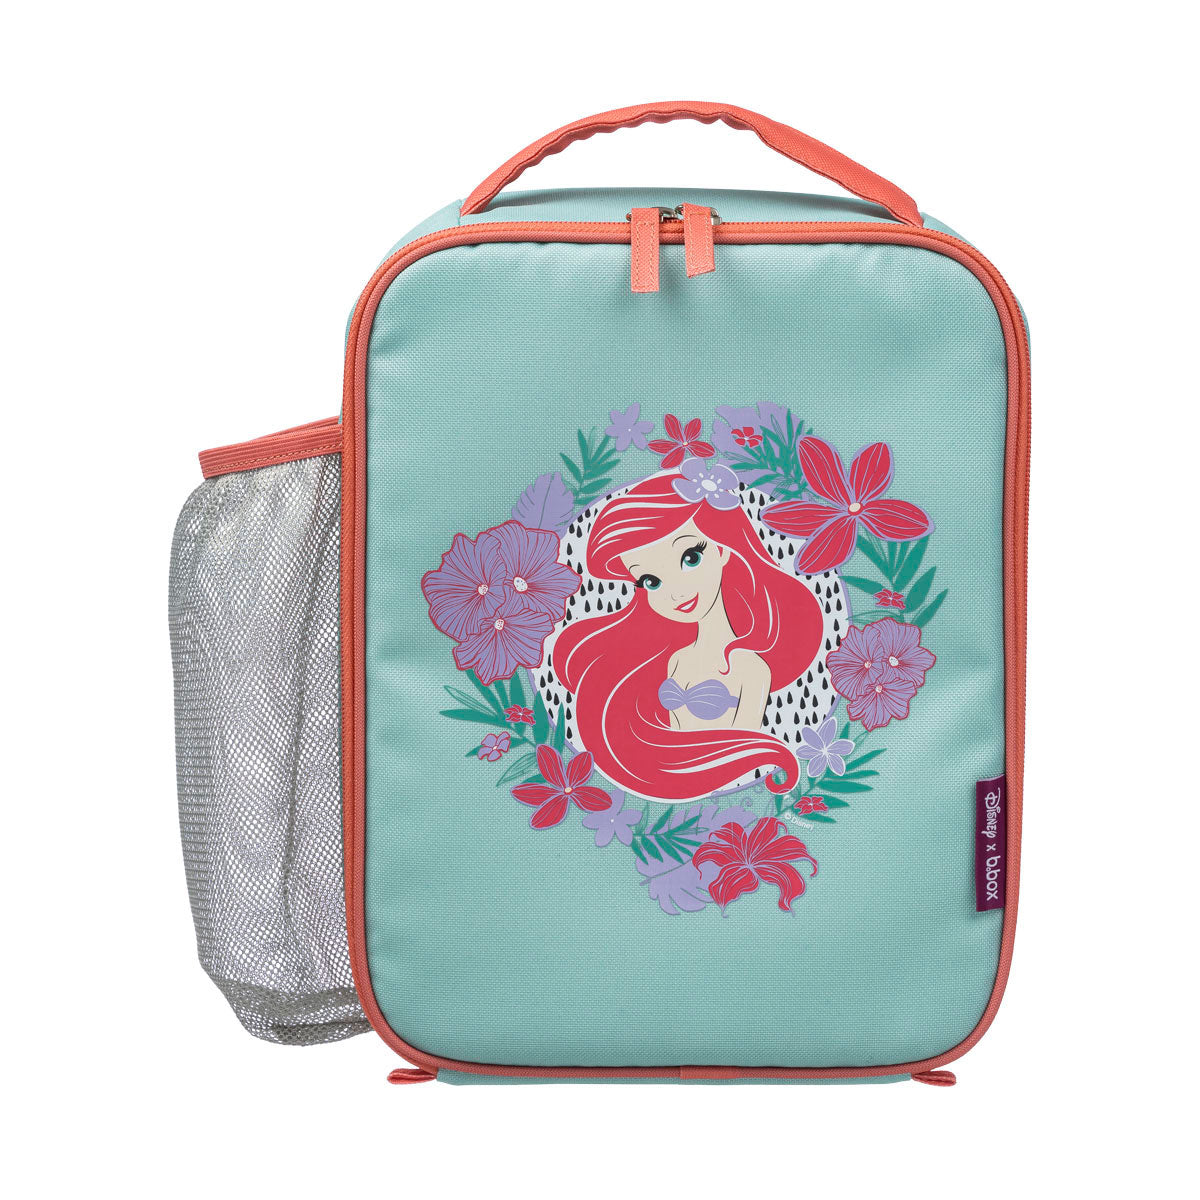 The Little Mermaid insulated lunch bag